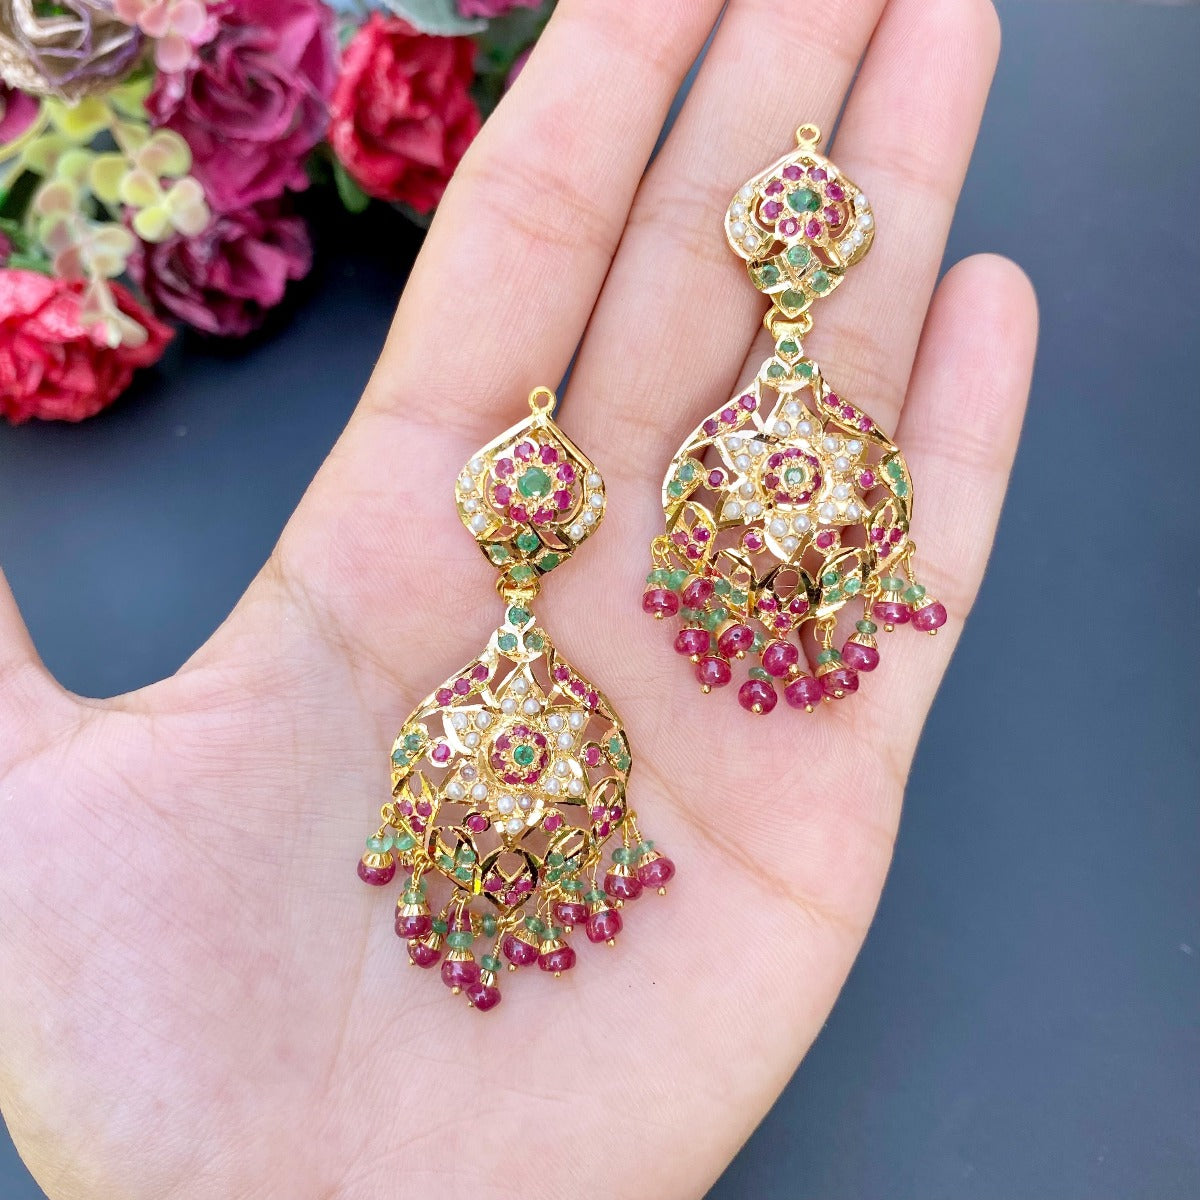 22k Gold Rani Haar Studded with Rubies, Emeralds and Pearls GNS 088